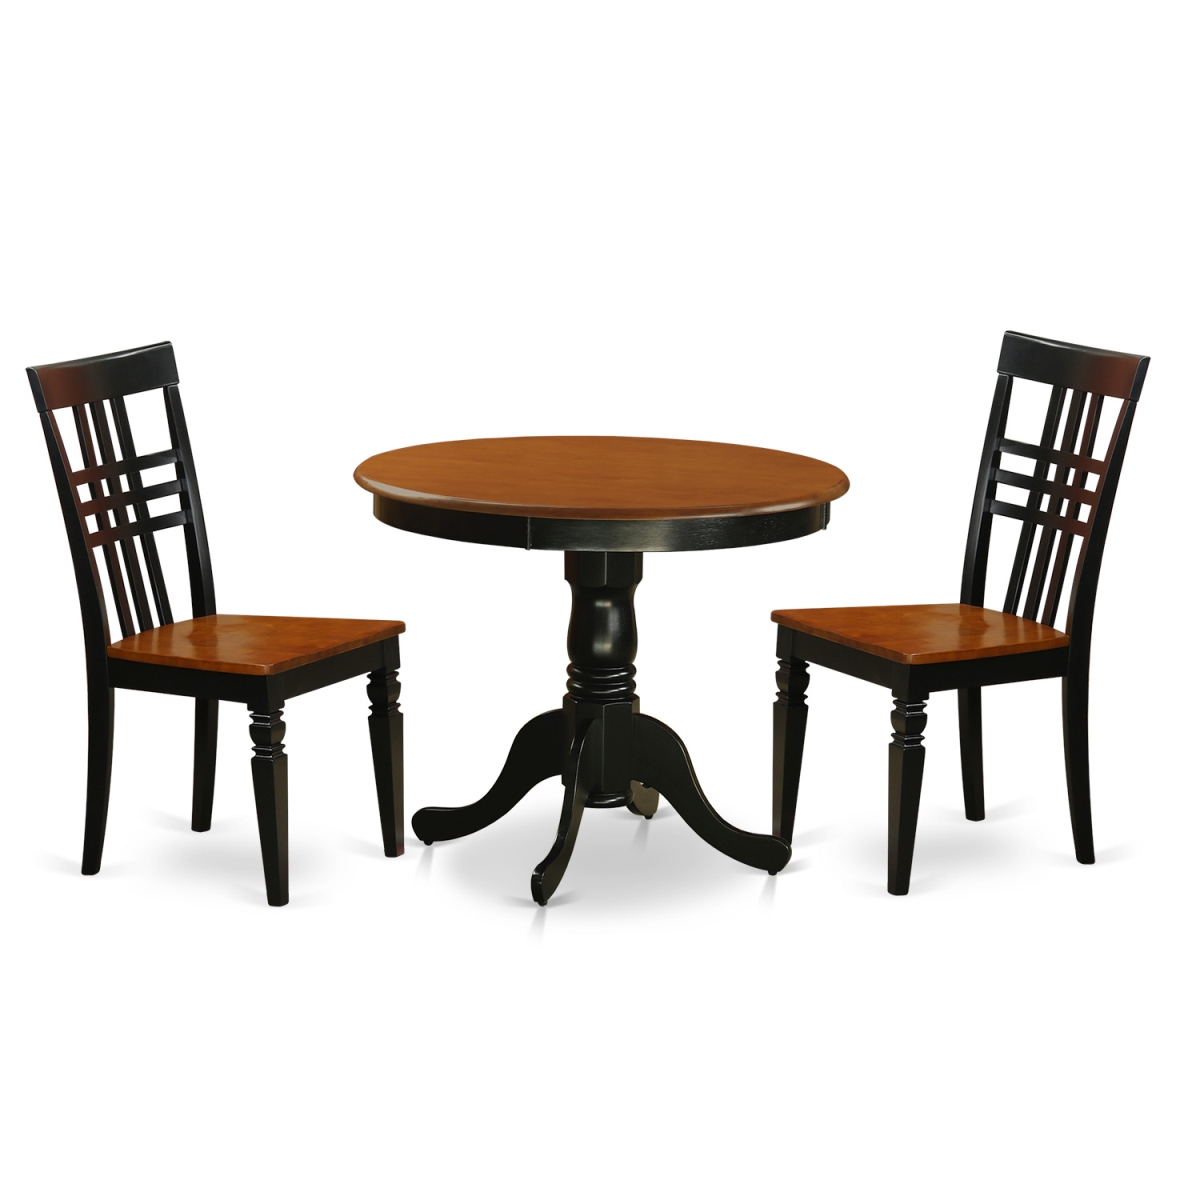 Picture of East West Furniture ANLG3-BCH-W Kitchen Table Set with One Table & Two Chairs, Black & Cherry - 3 Piece